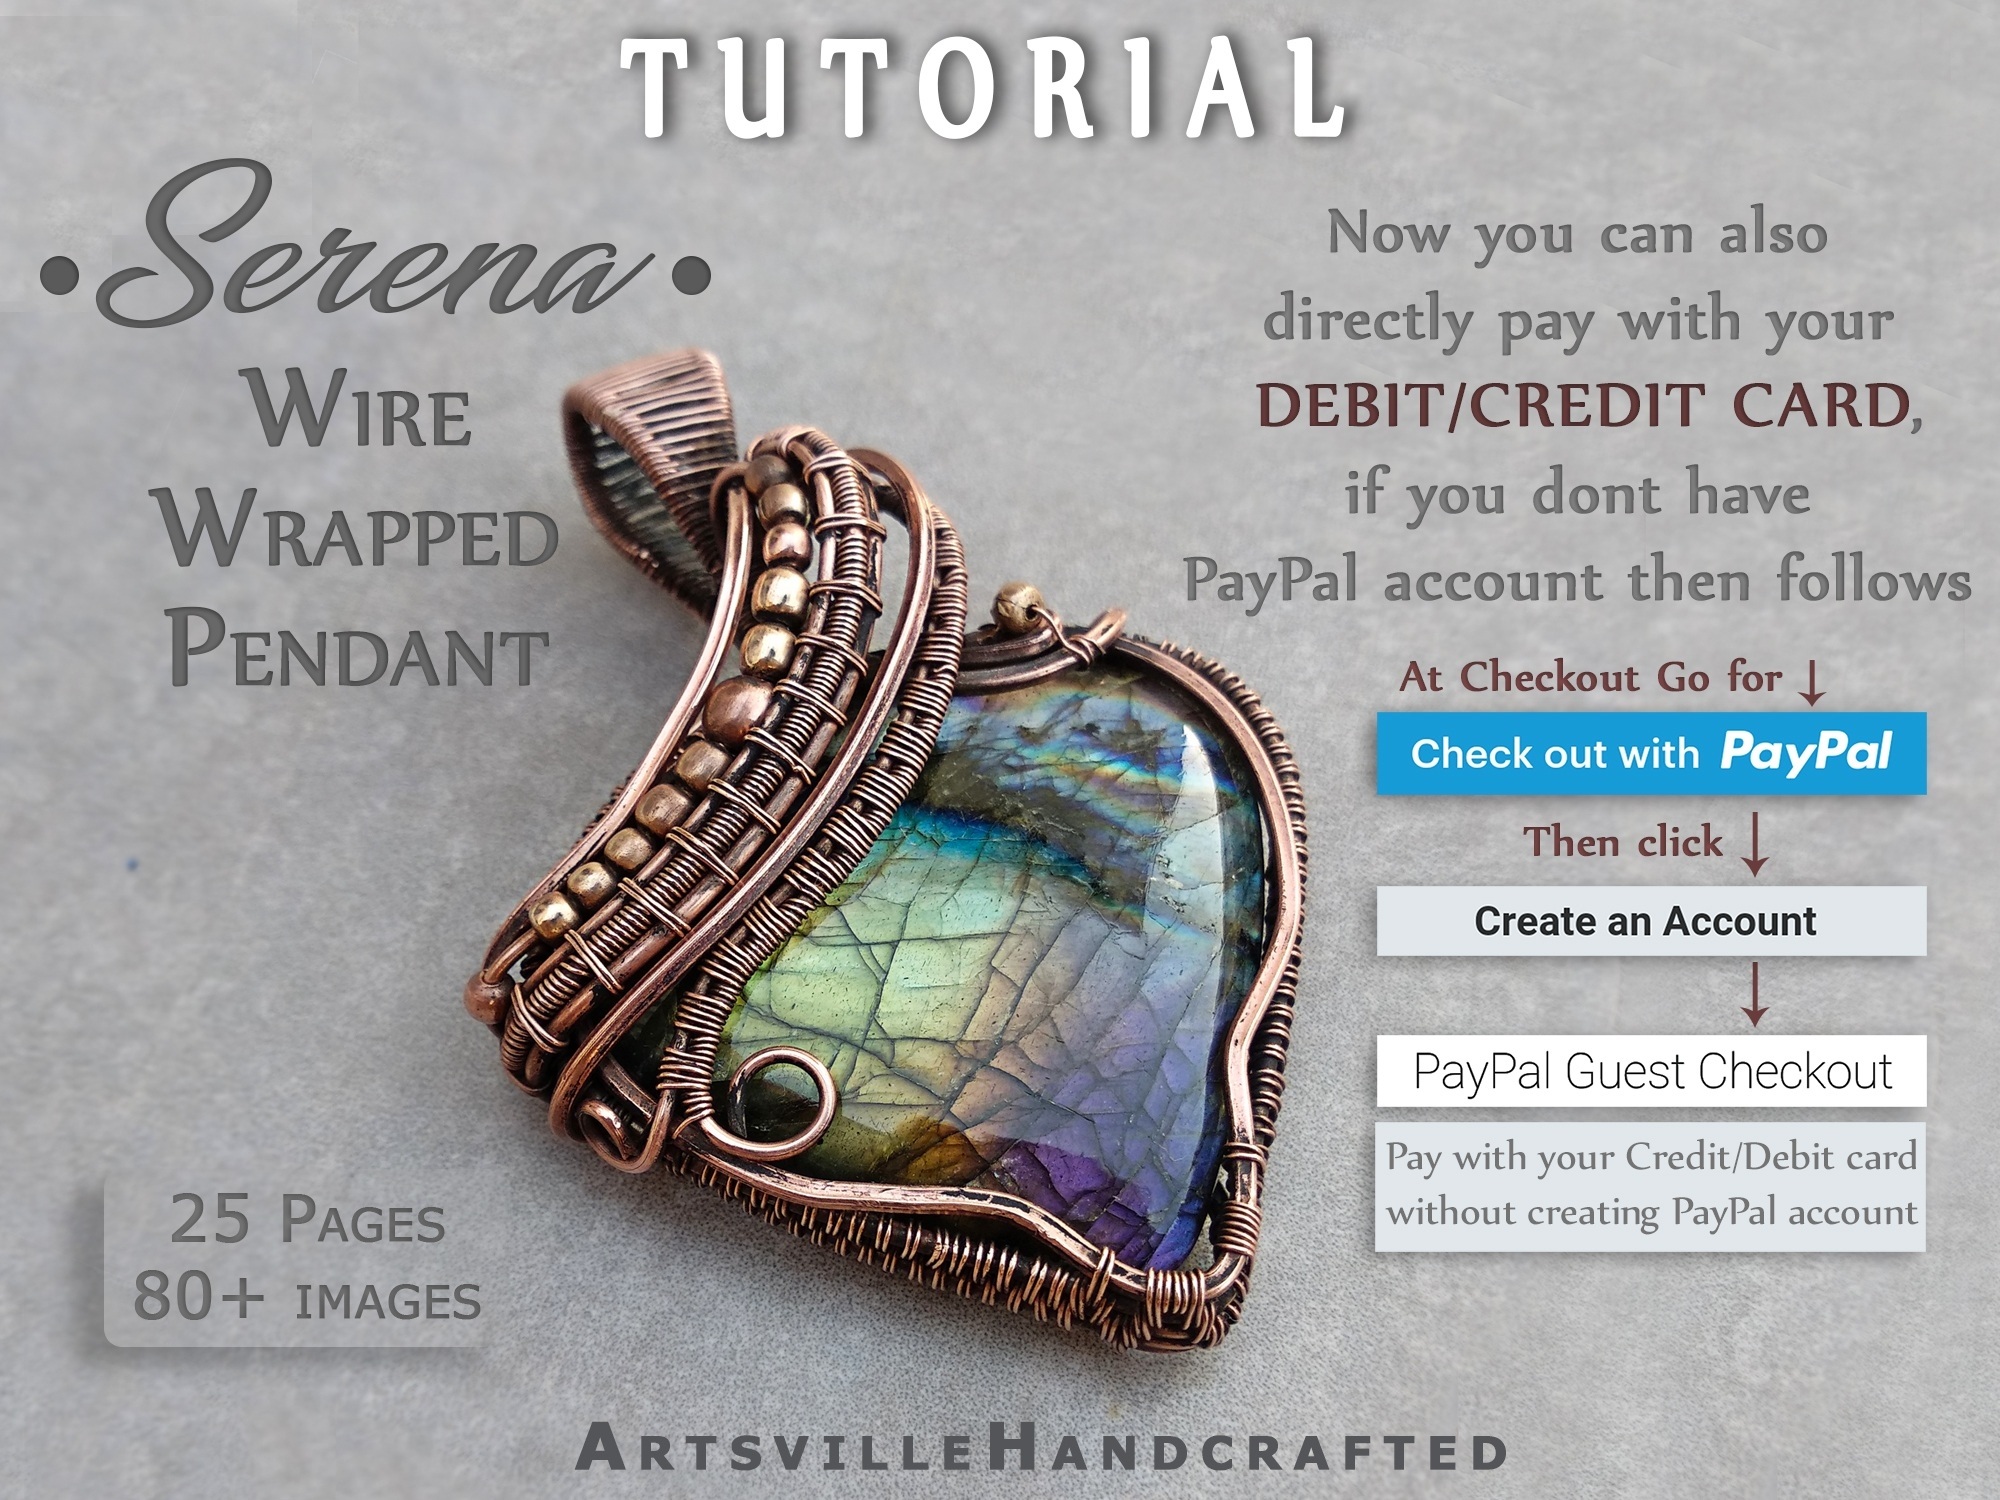 Wire Wrap Jewelry: Learn The Basics On How To Make Your Wire Wrap